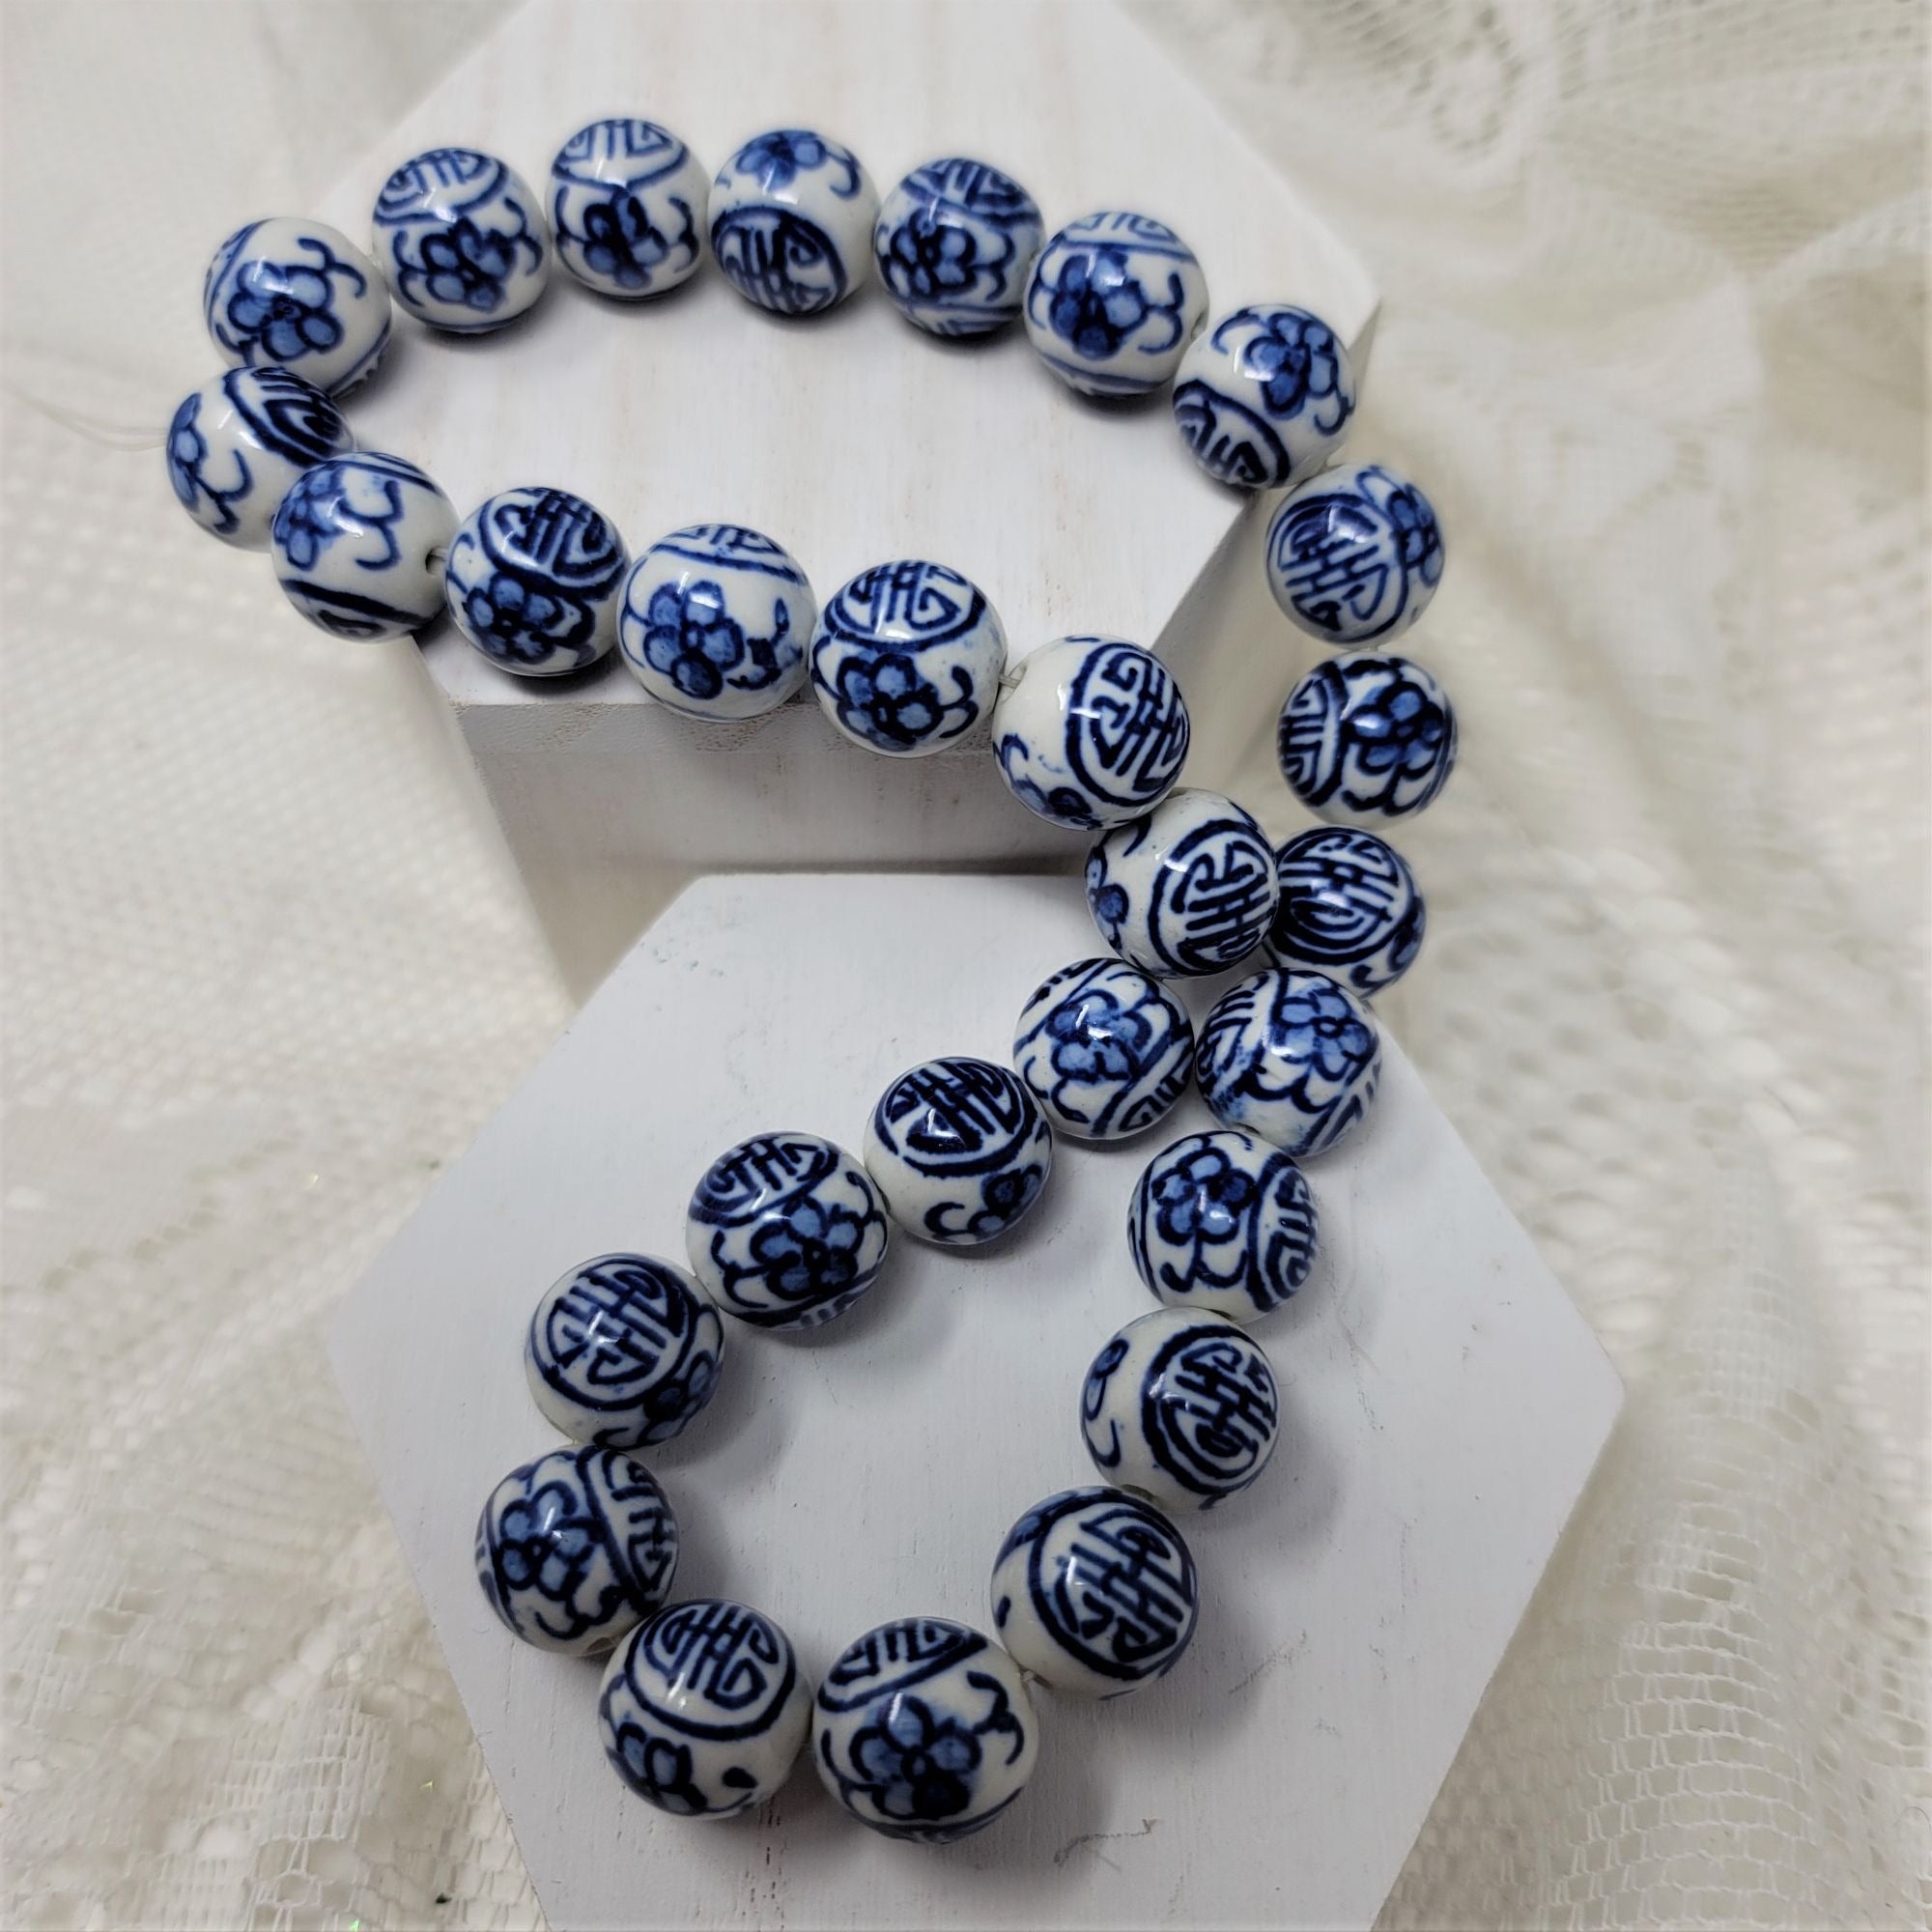 Blue & White Porcelain Beads Round Hand Painted